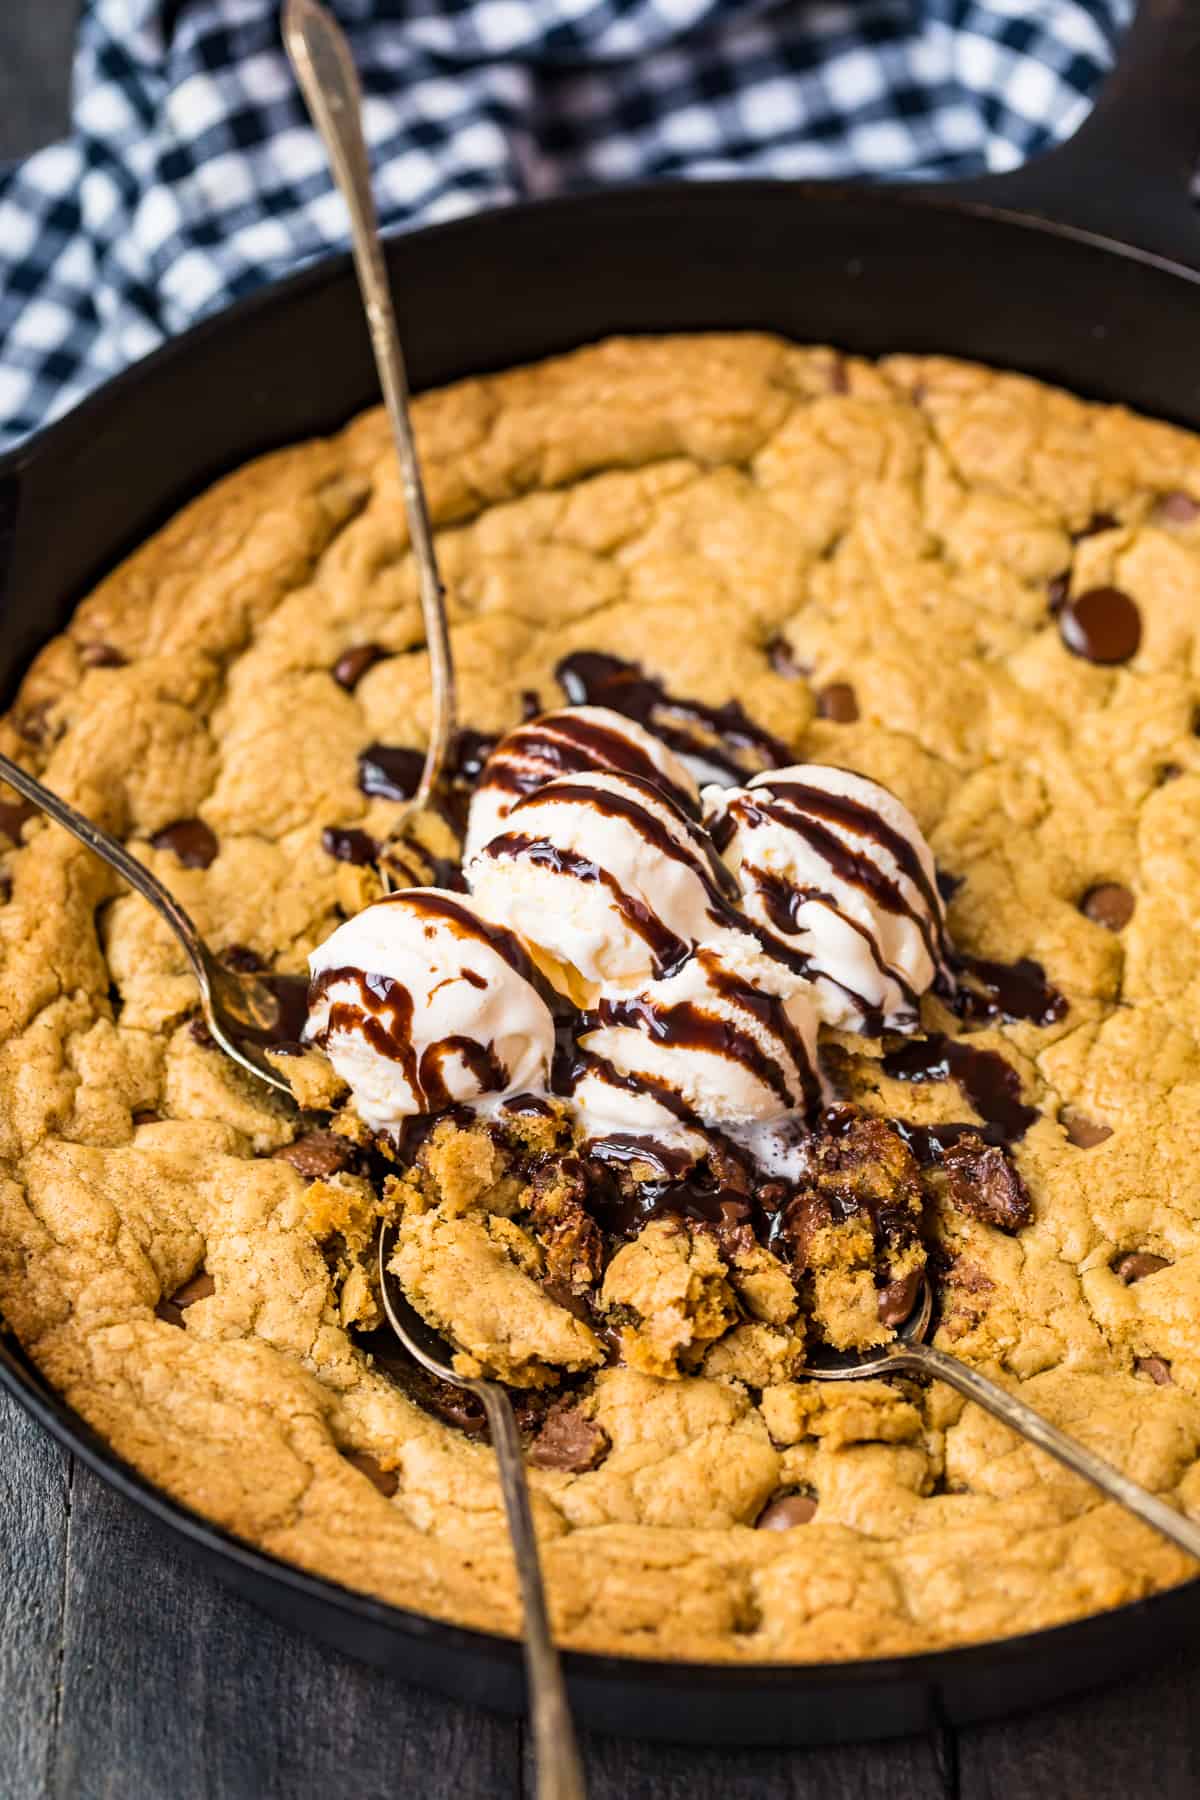 https://www.thecookierookie.com/wp-content/uploads/2020/10/skillet-chocolate-chip-cookie-recipe-3-of-8.jpg